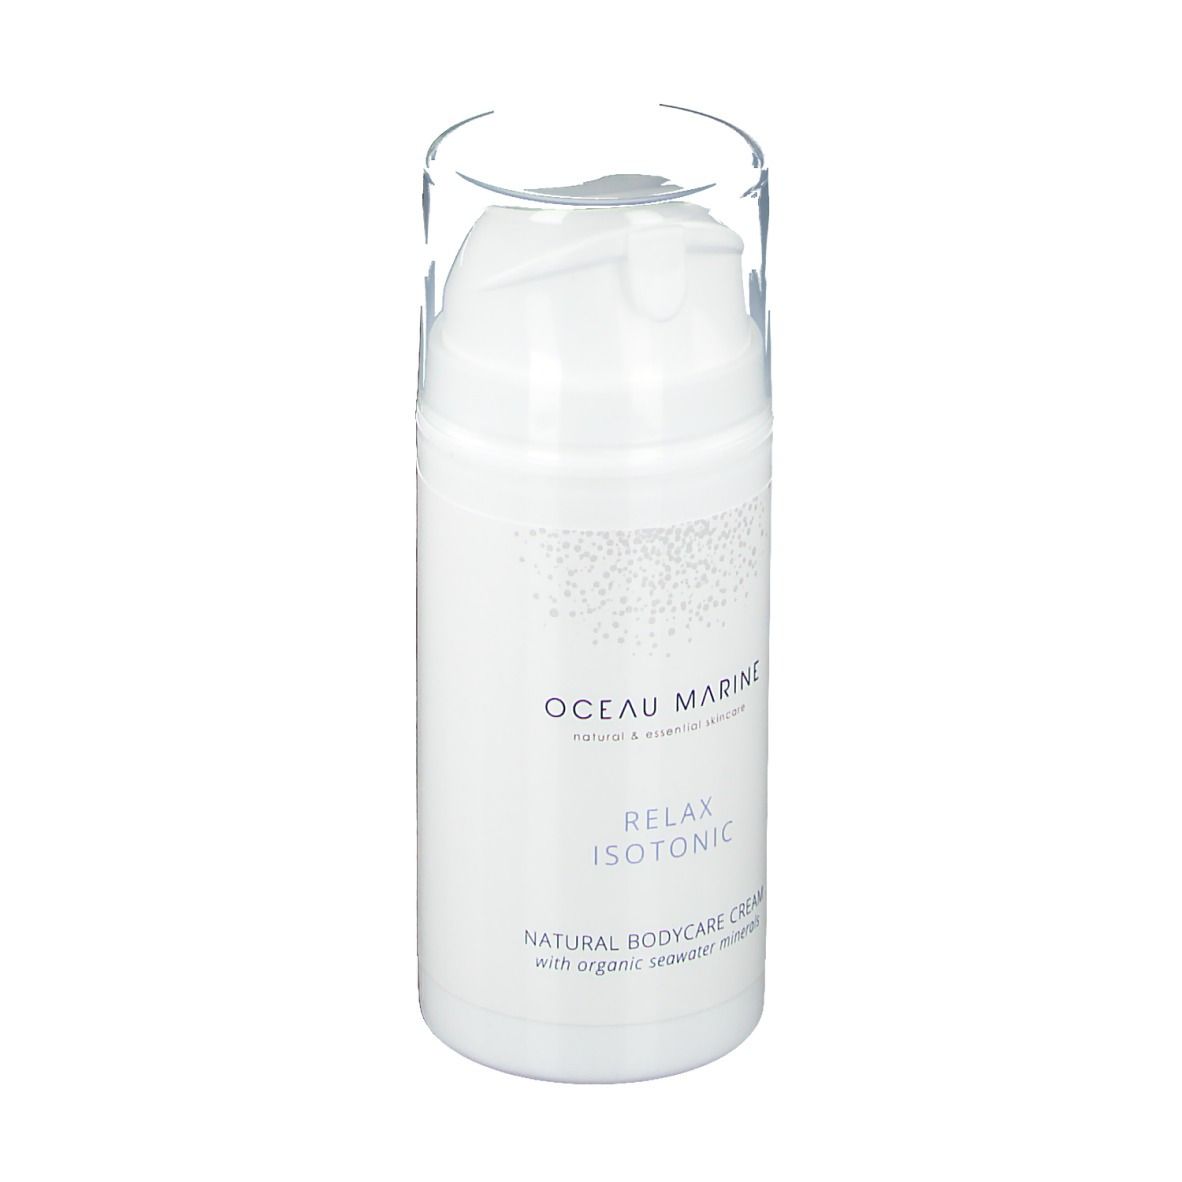 Oceau Marine Relax Isotonic Crème